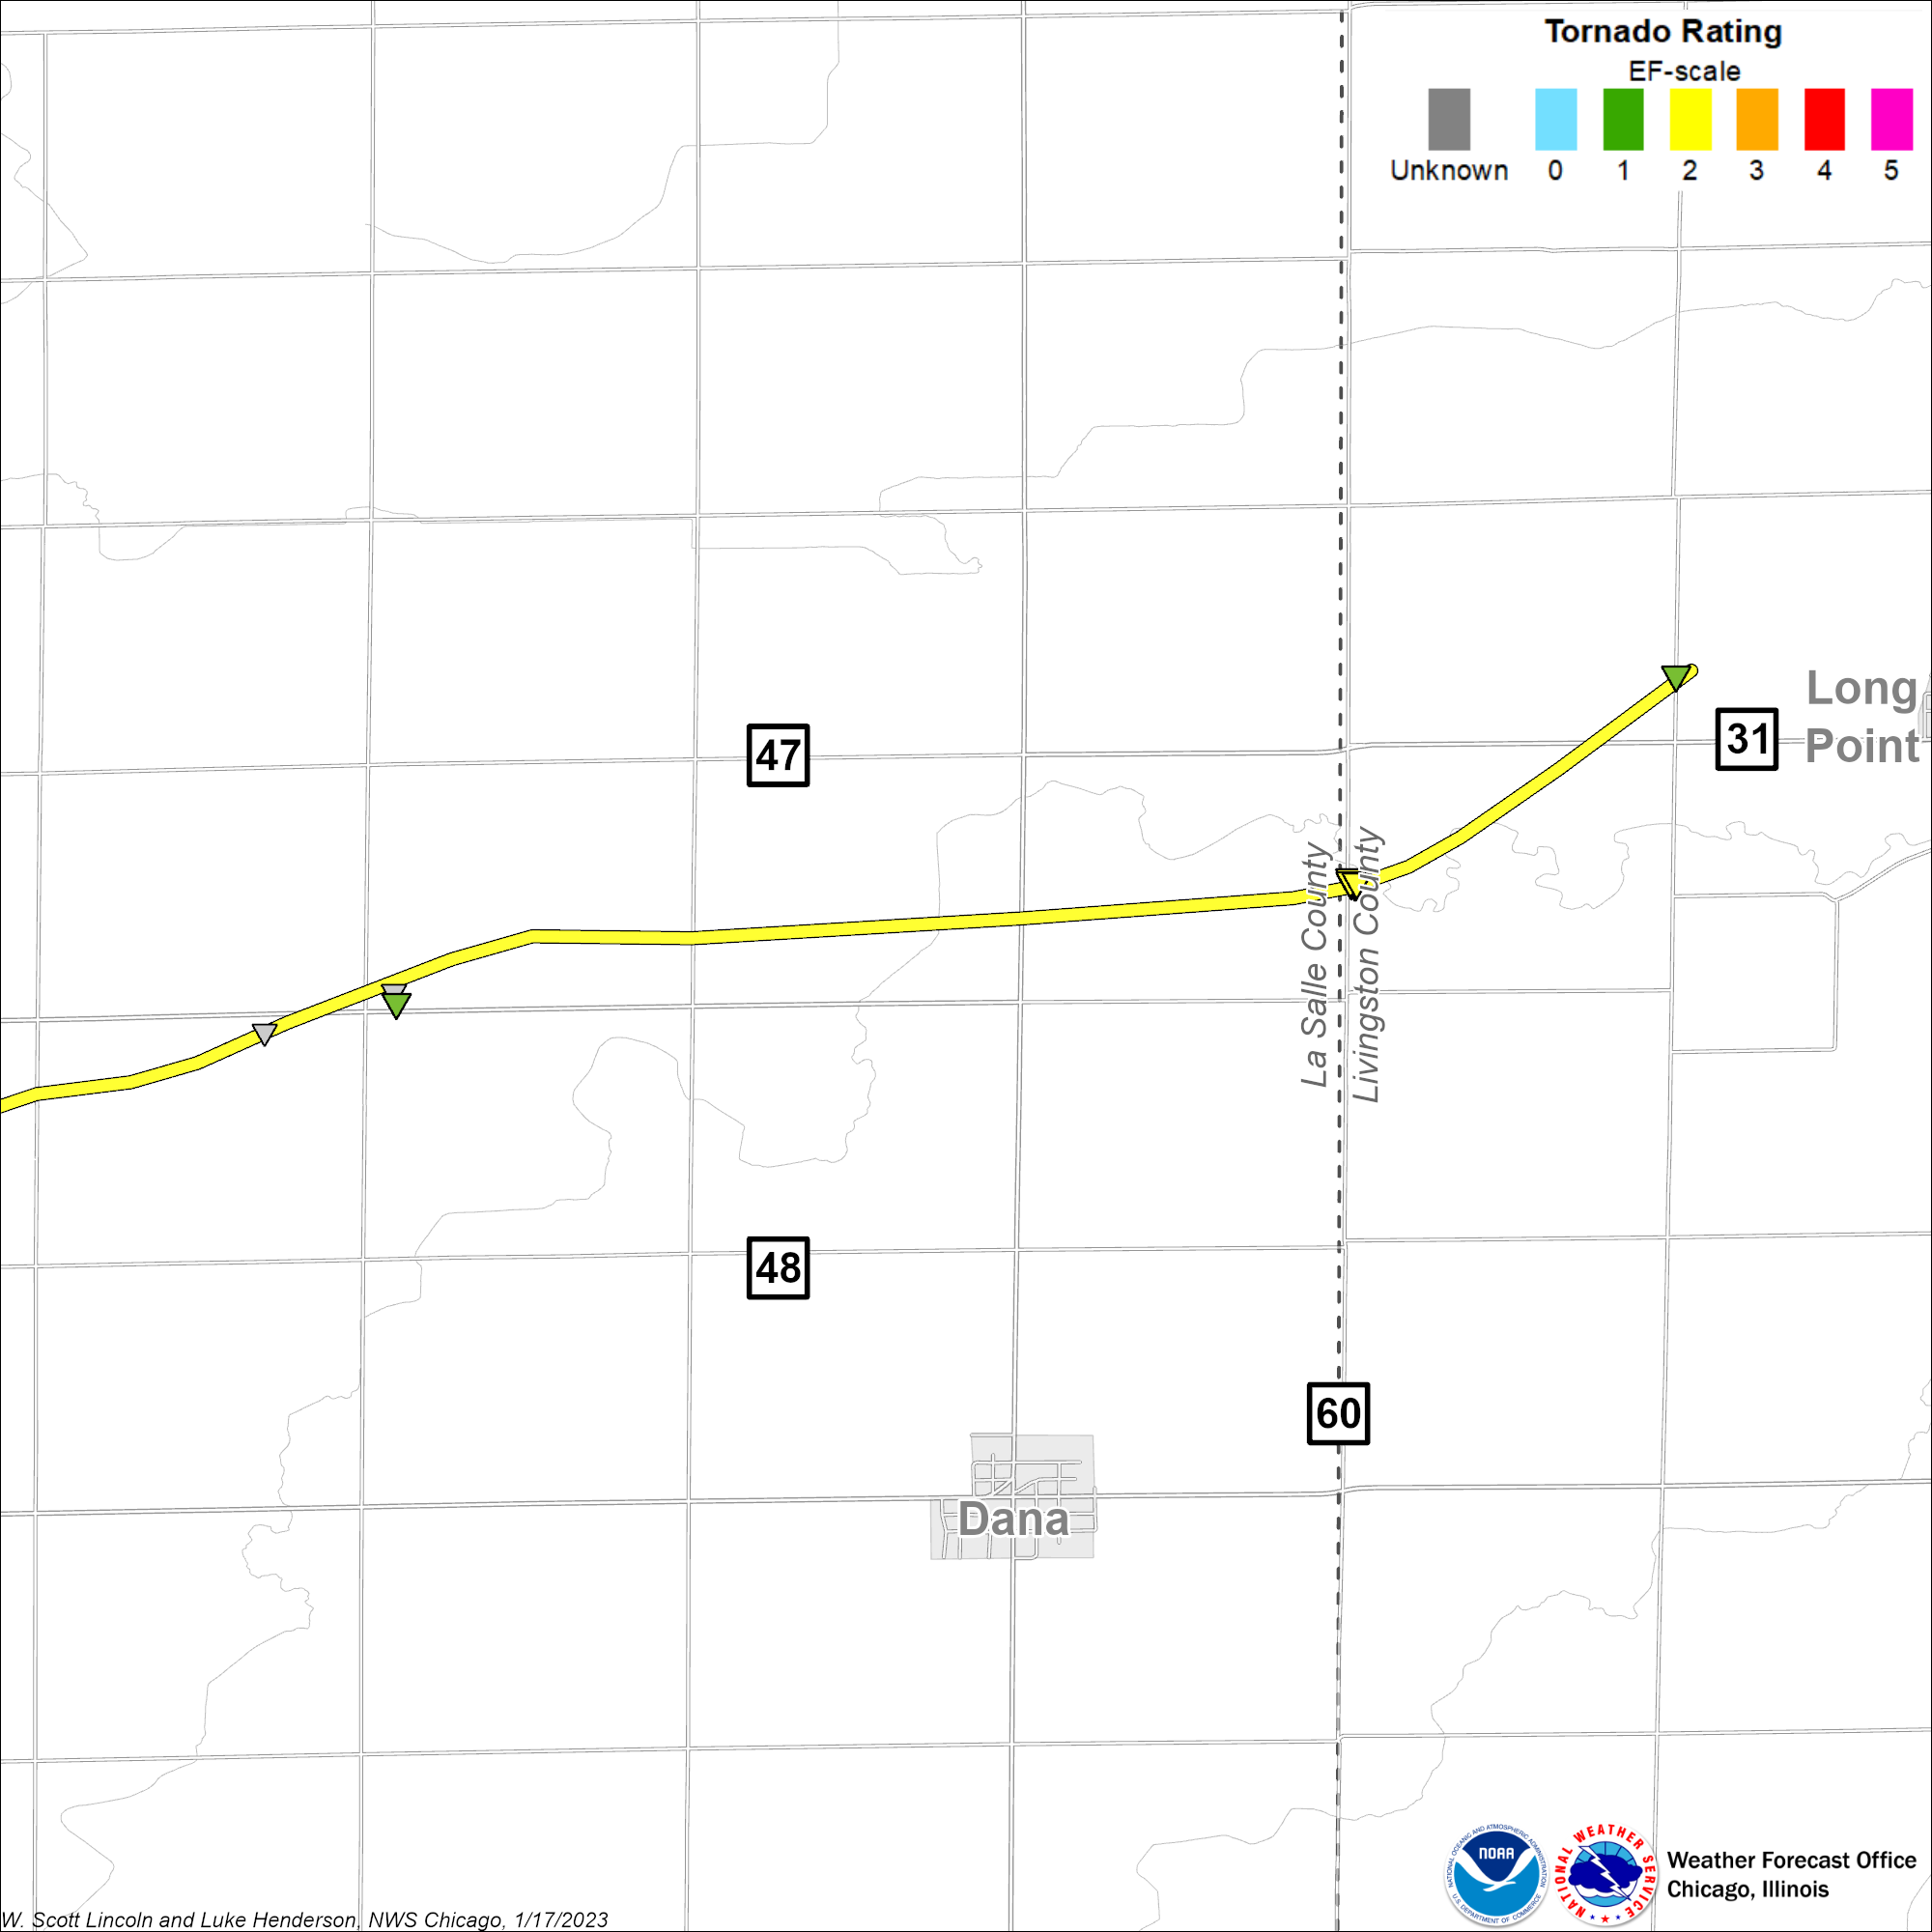 Map showing the track of the Dana - Long Point tornado